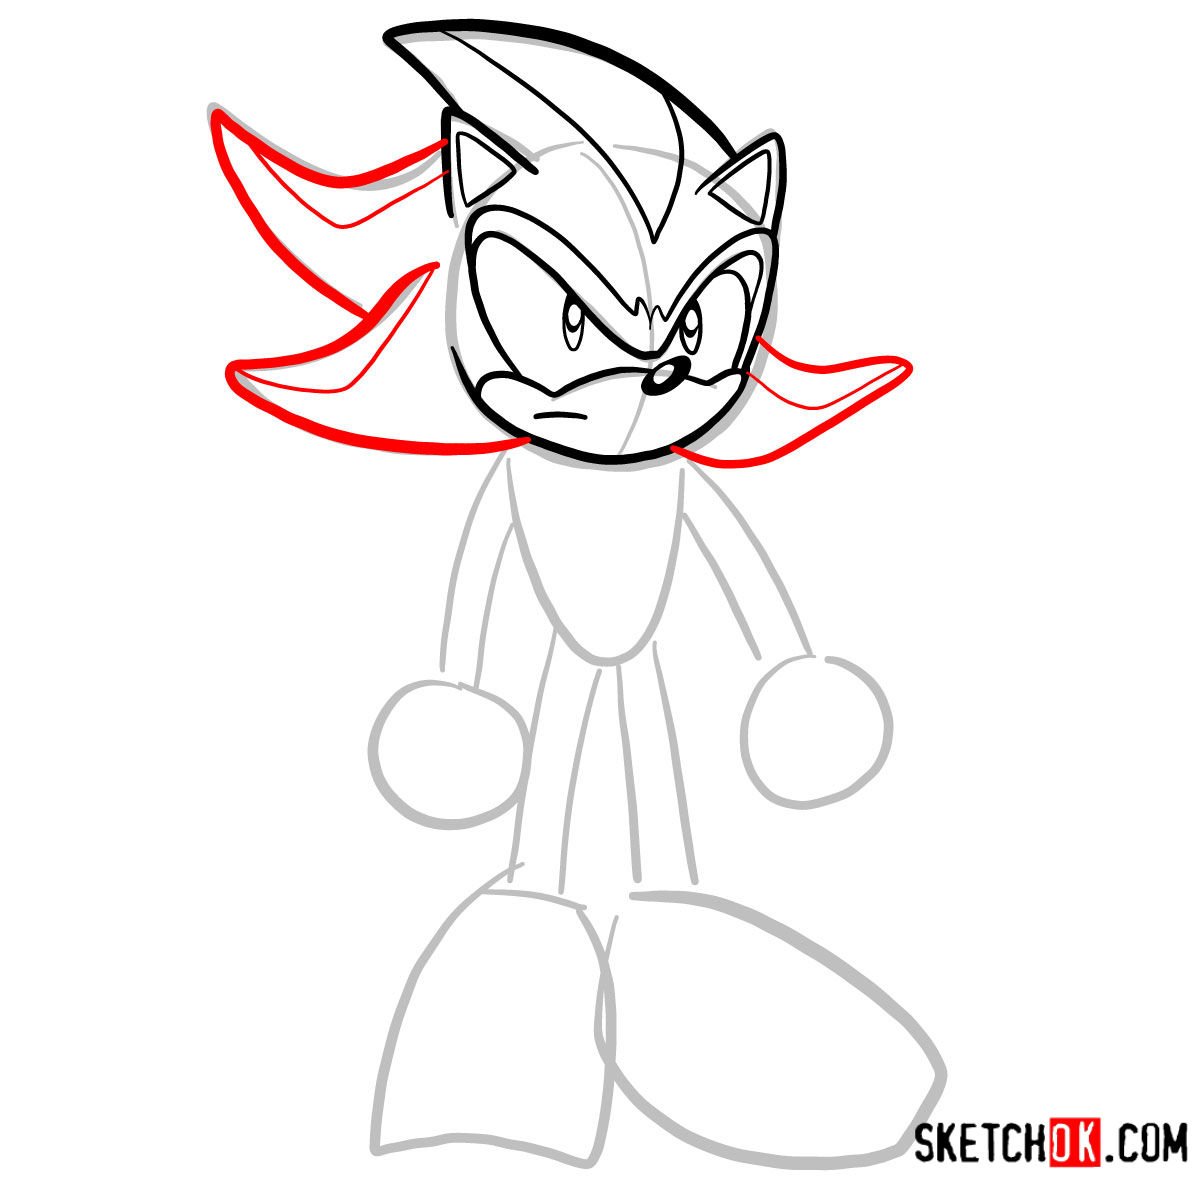 How to draw Shadow the Hedgehog - step 05